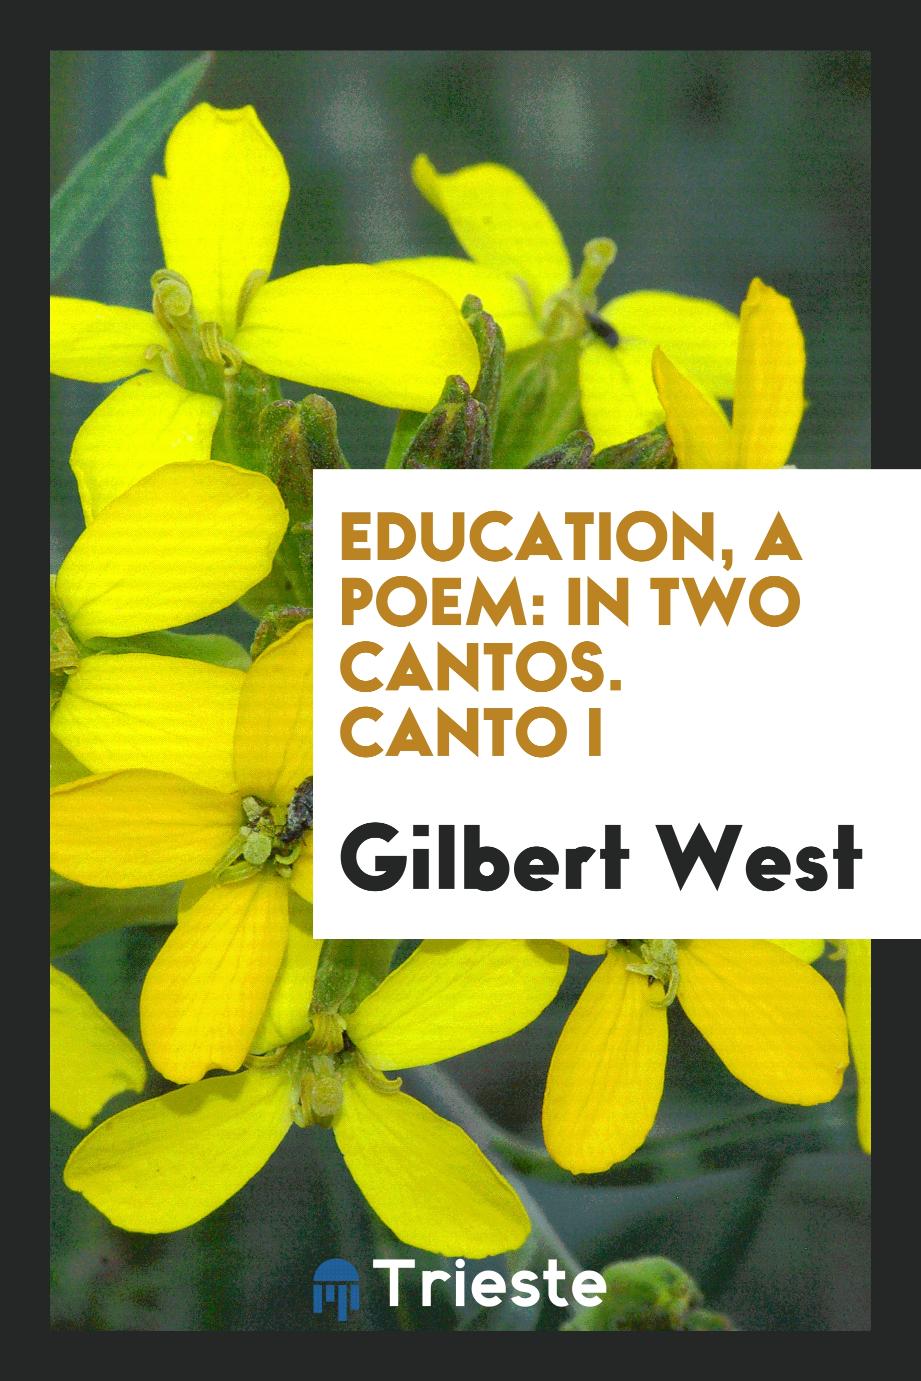 Education, a poem: in two cantos. Canto I